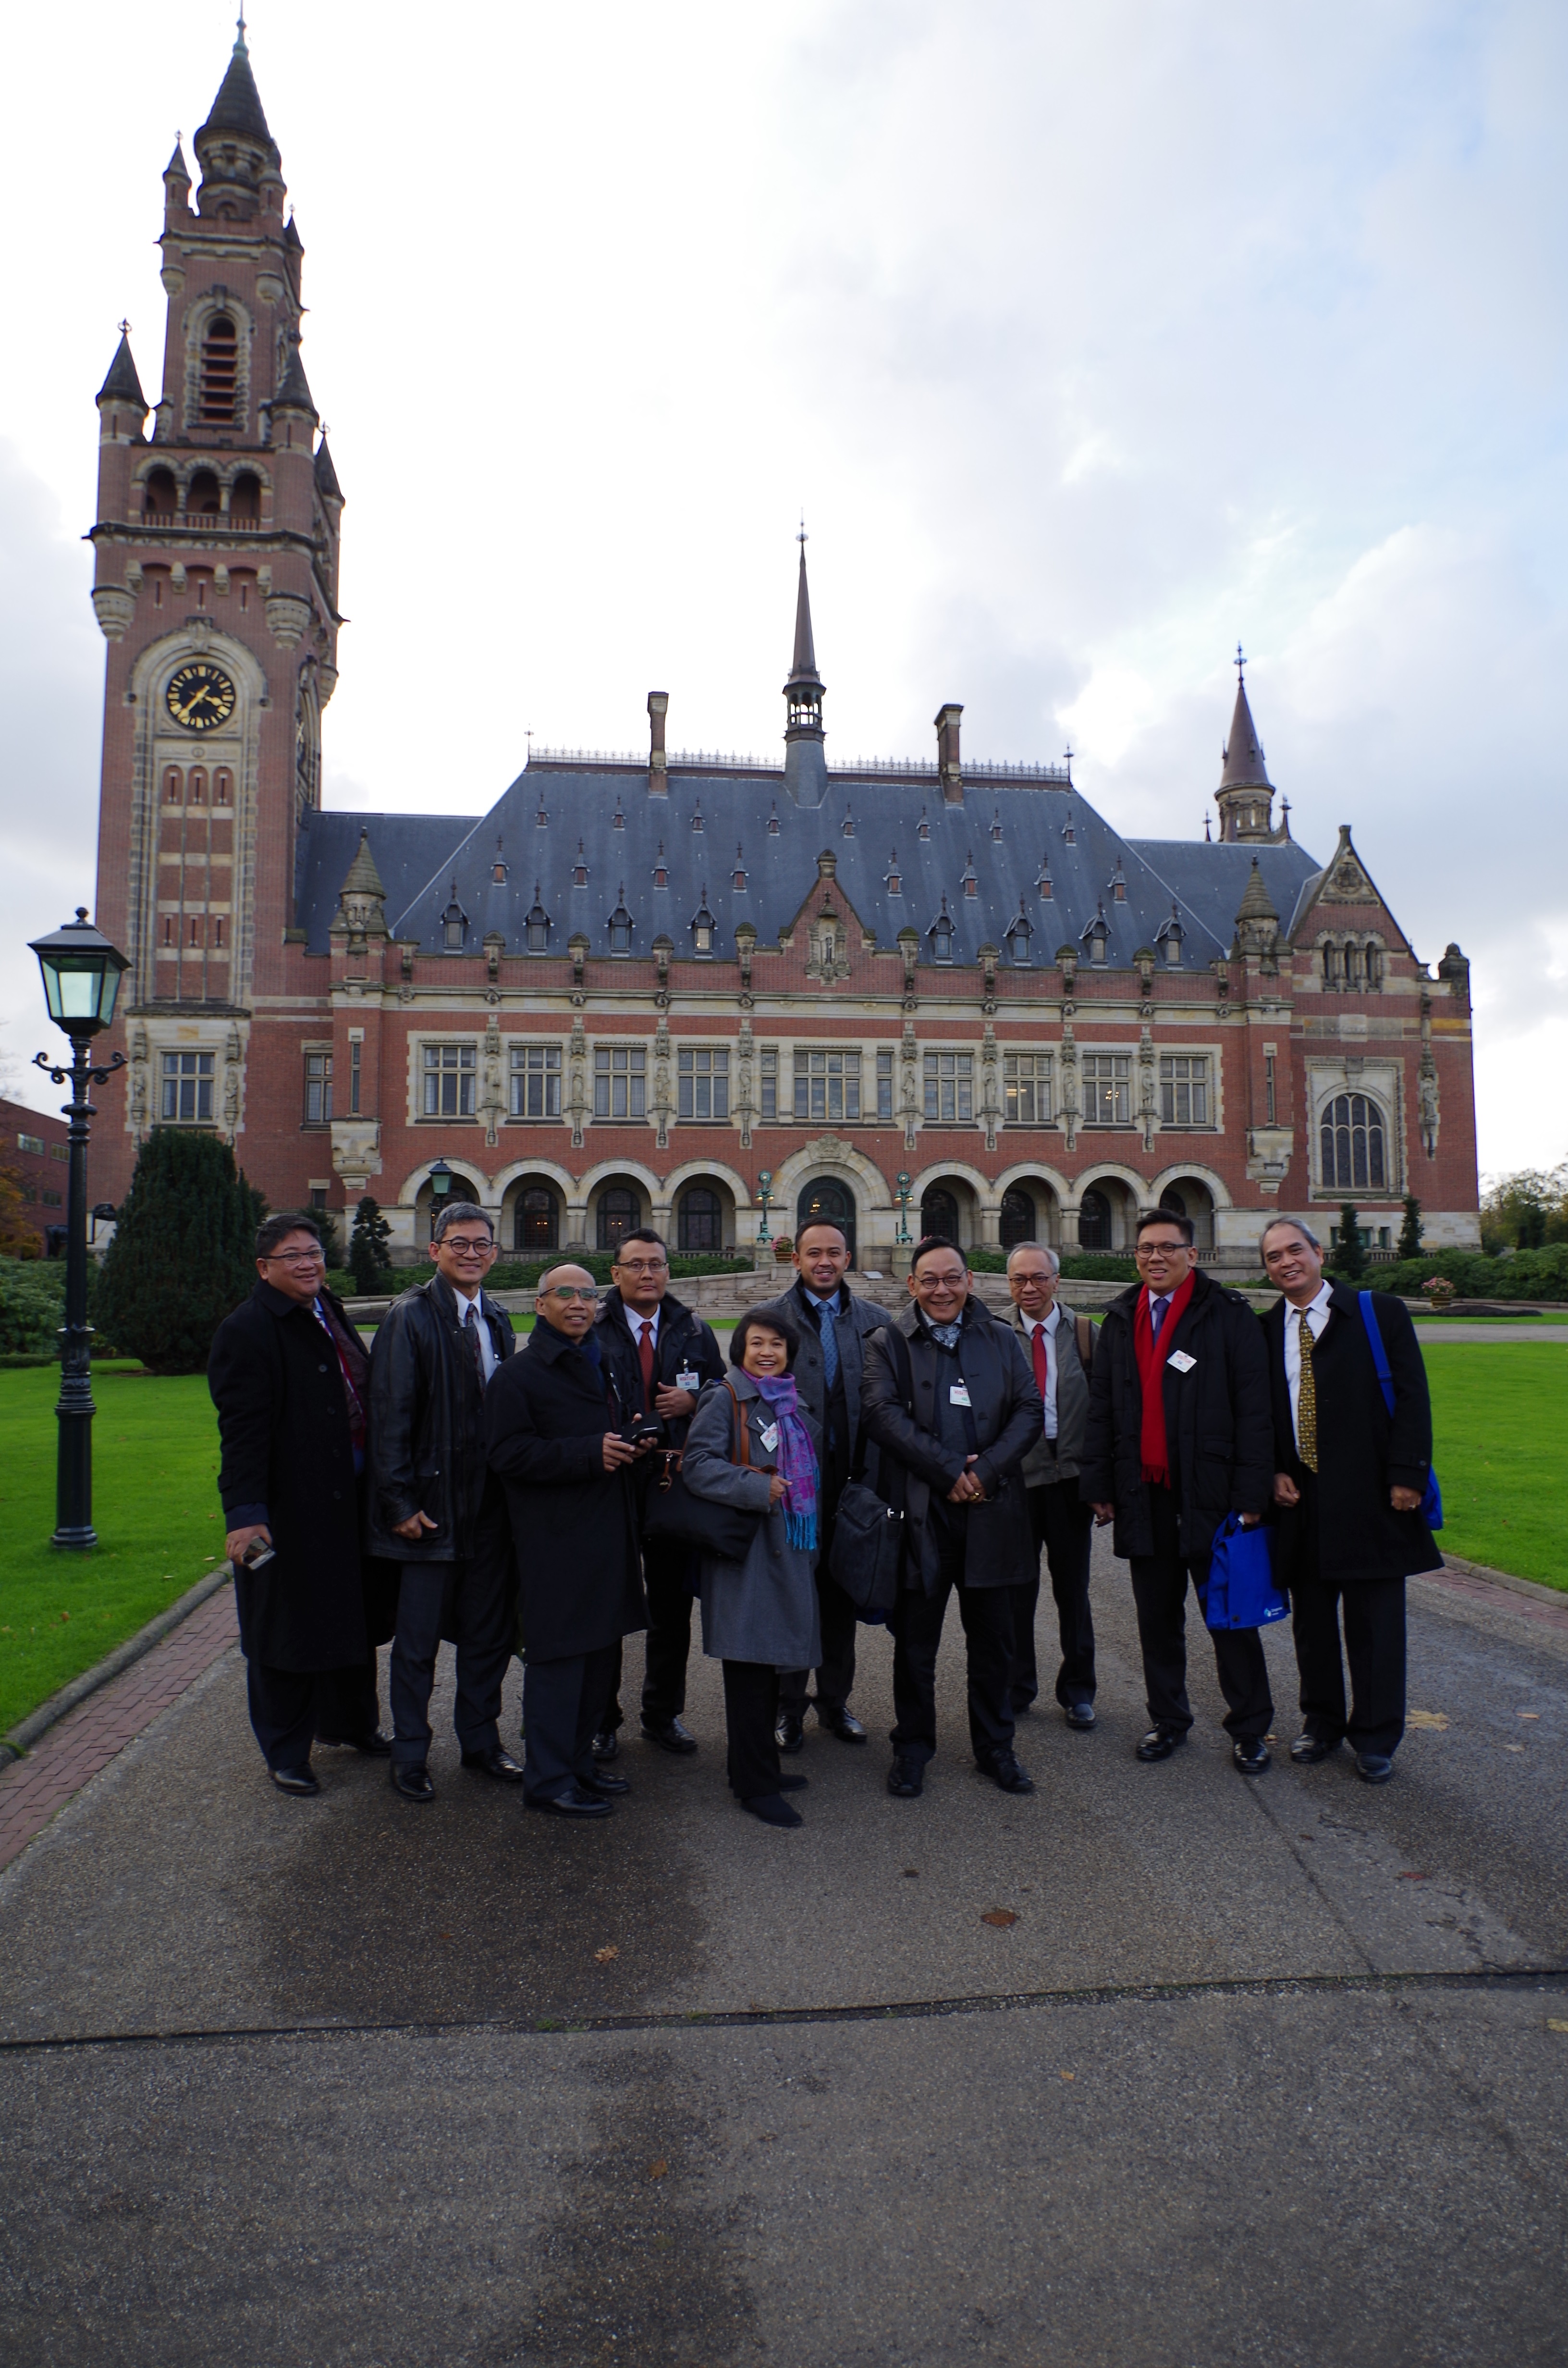 Participants in front of the Peace Palace